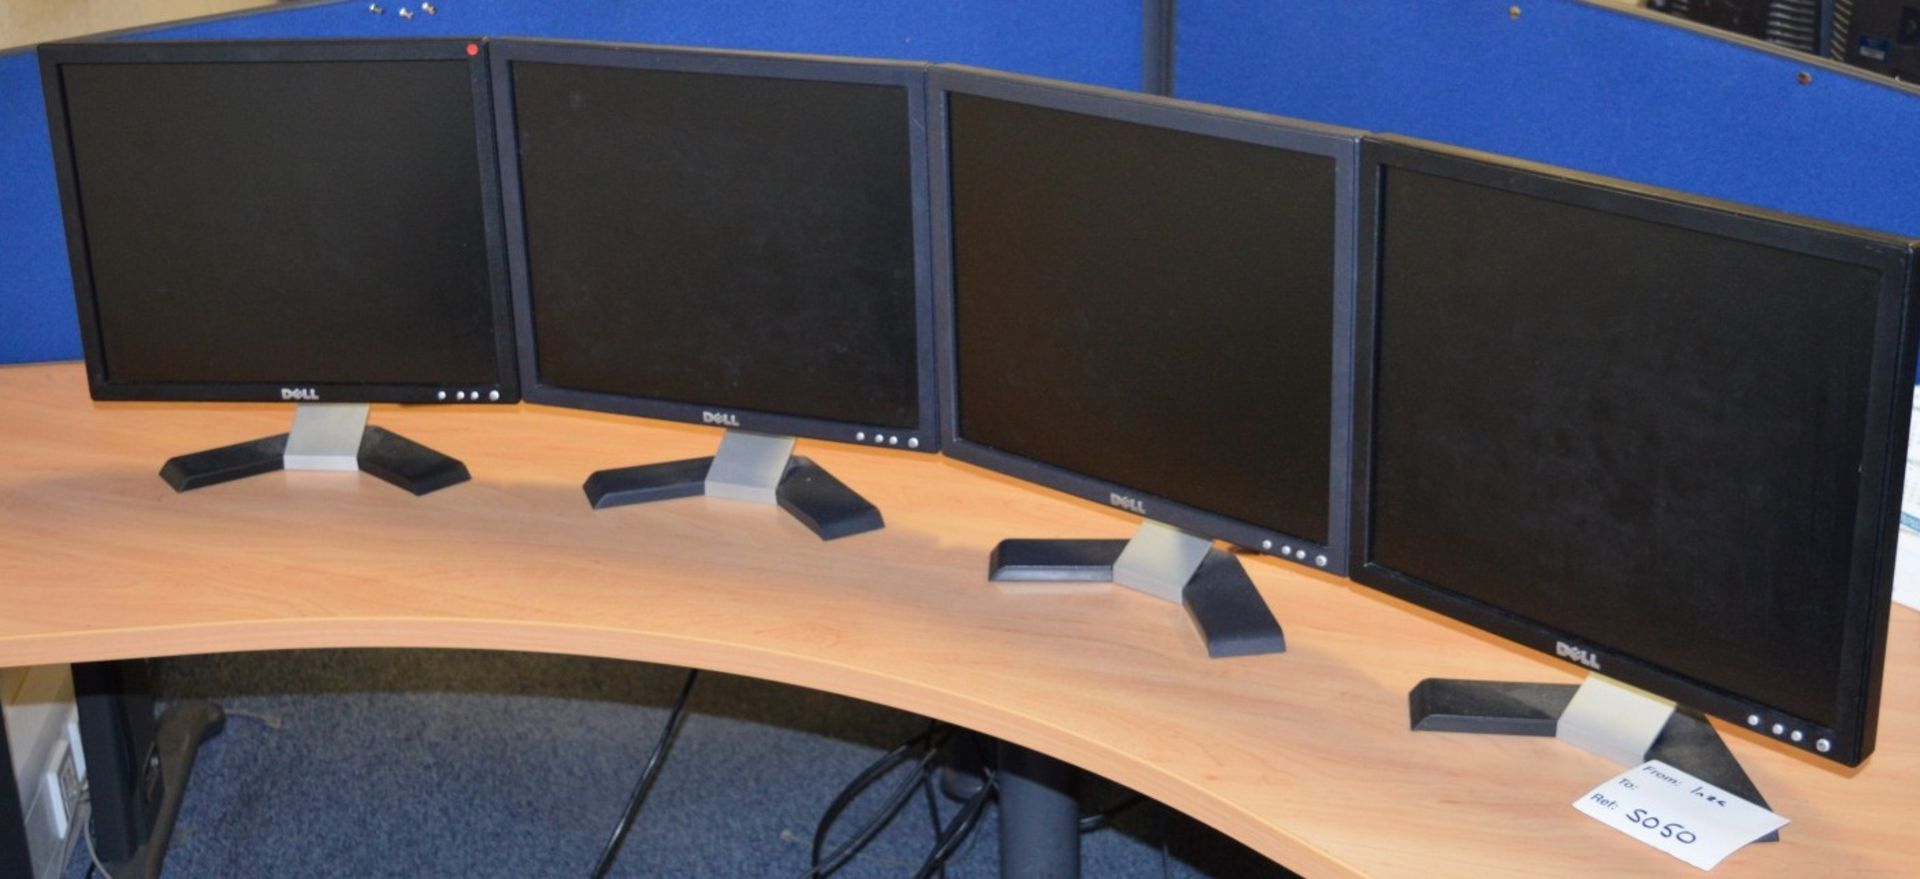 4 x Dell 17 Inch Flatscreen Computer Monitors - Without Cables - CL300 - Ref S050 - Location: